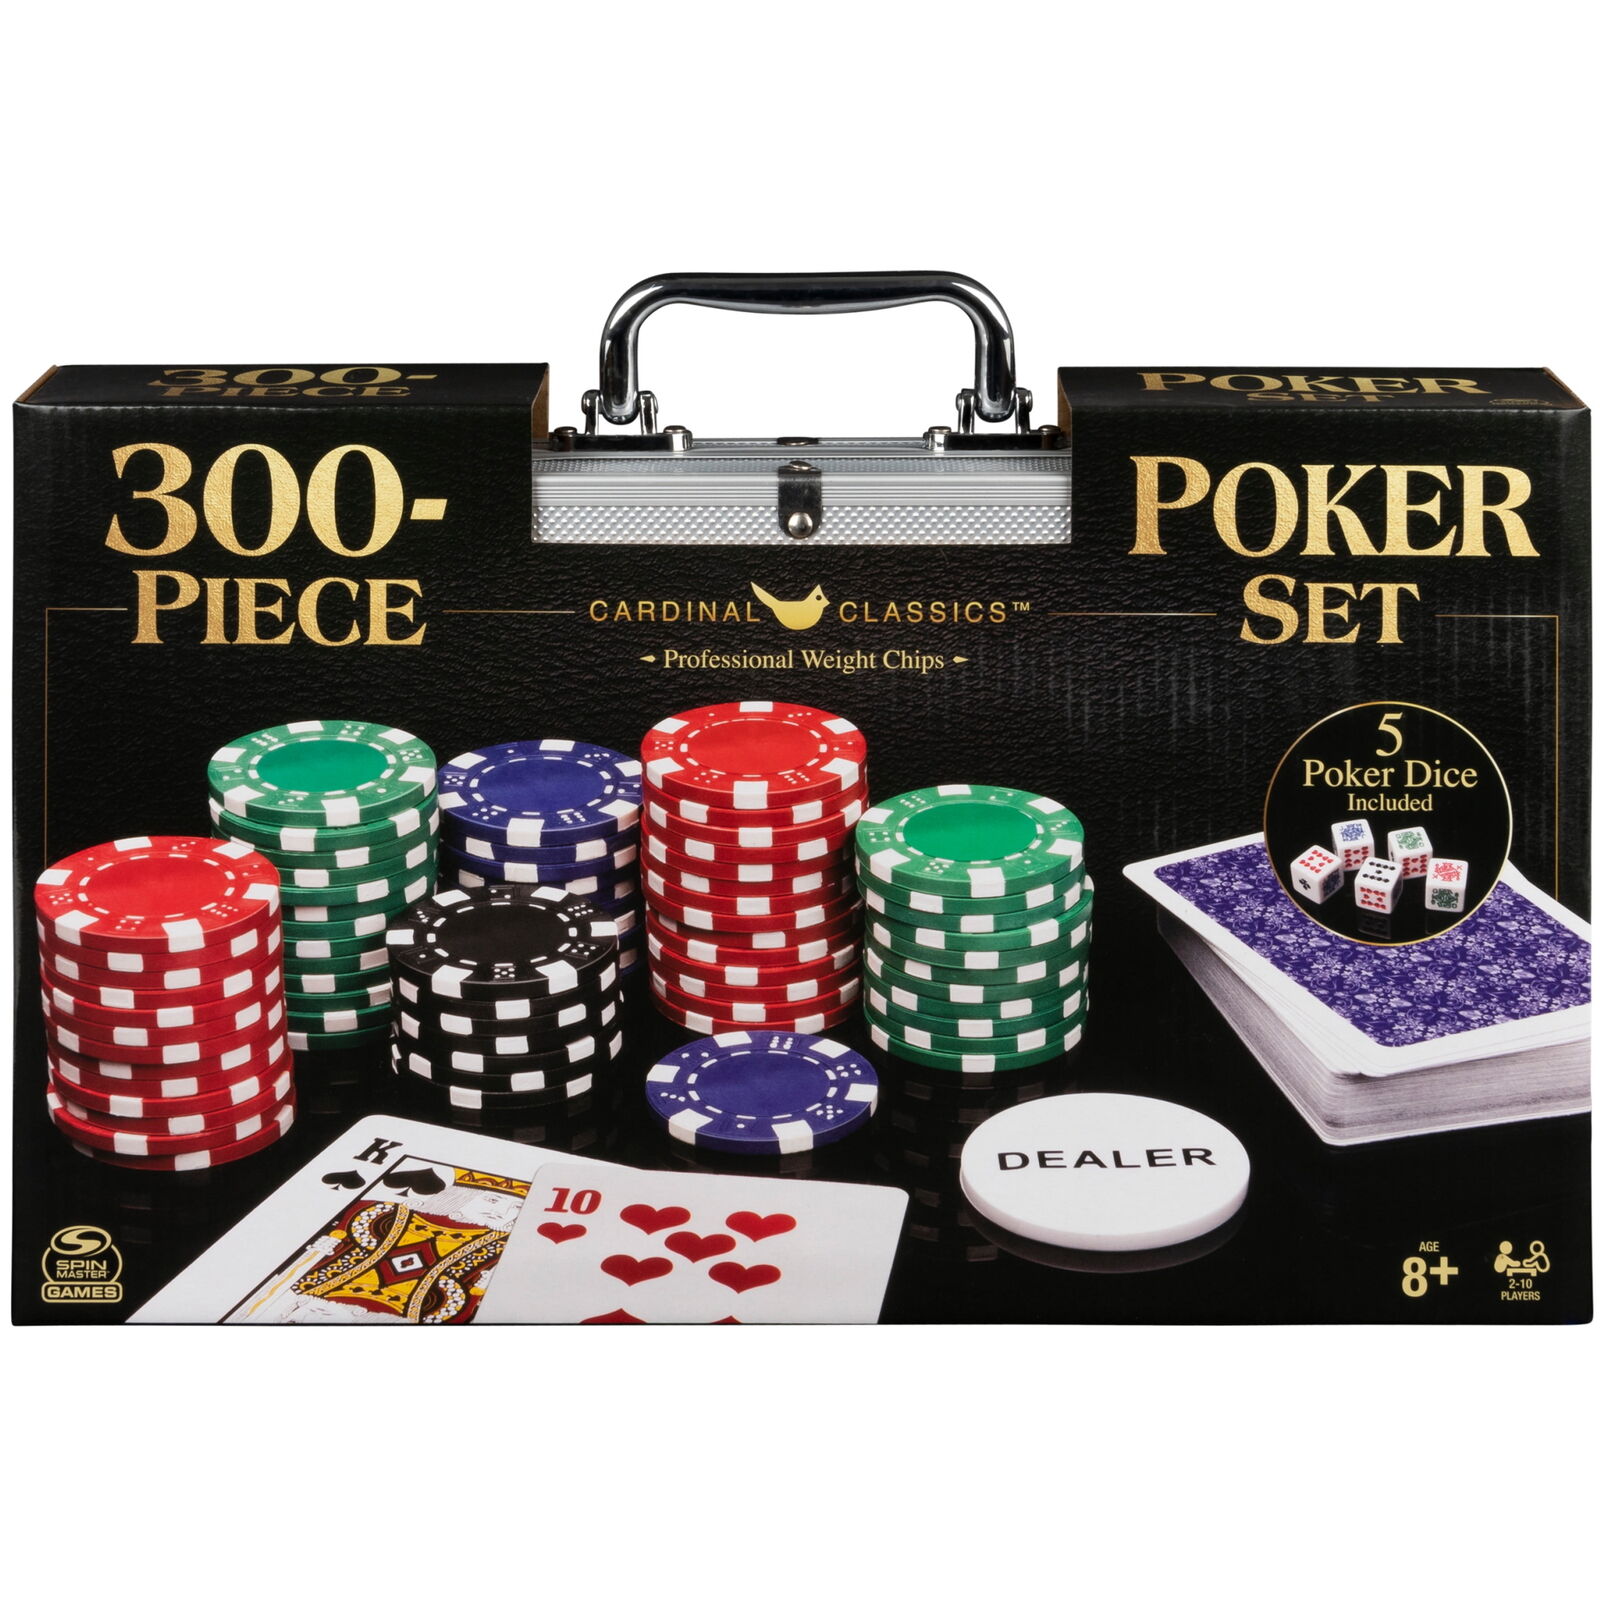 300-Piece Poker Set with Aluminum Carrying Case & Professional Weight Chips Plus